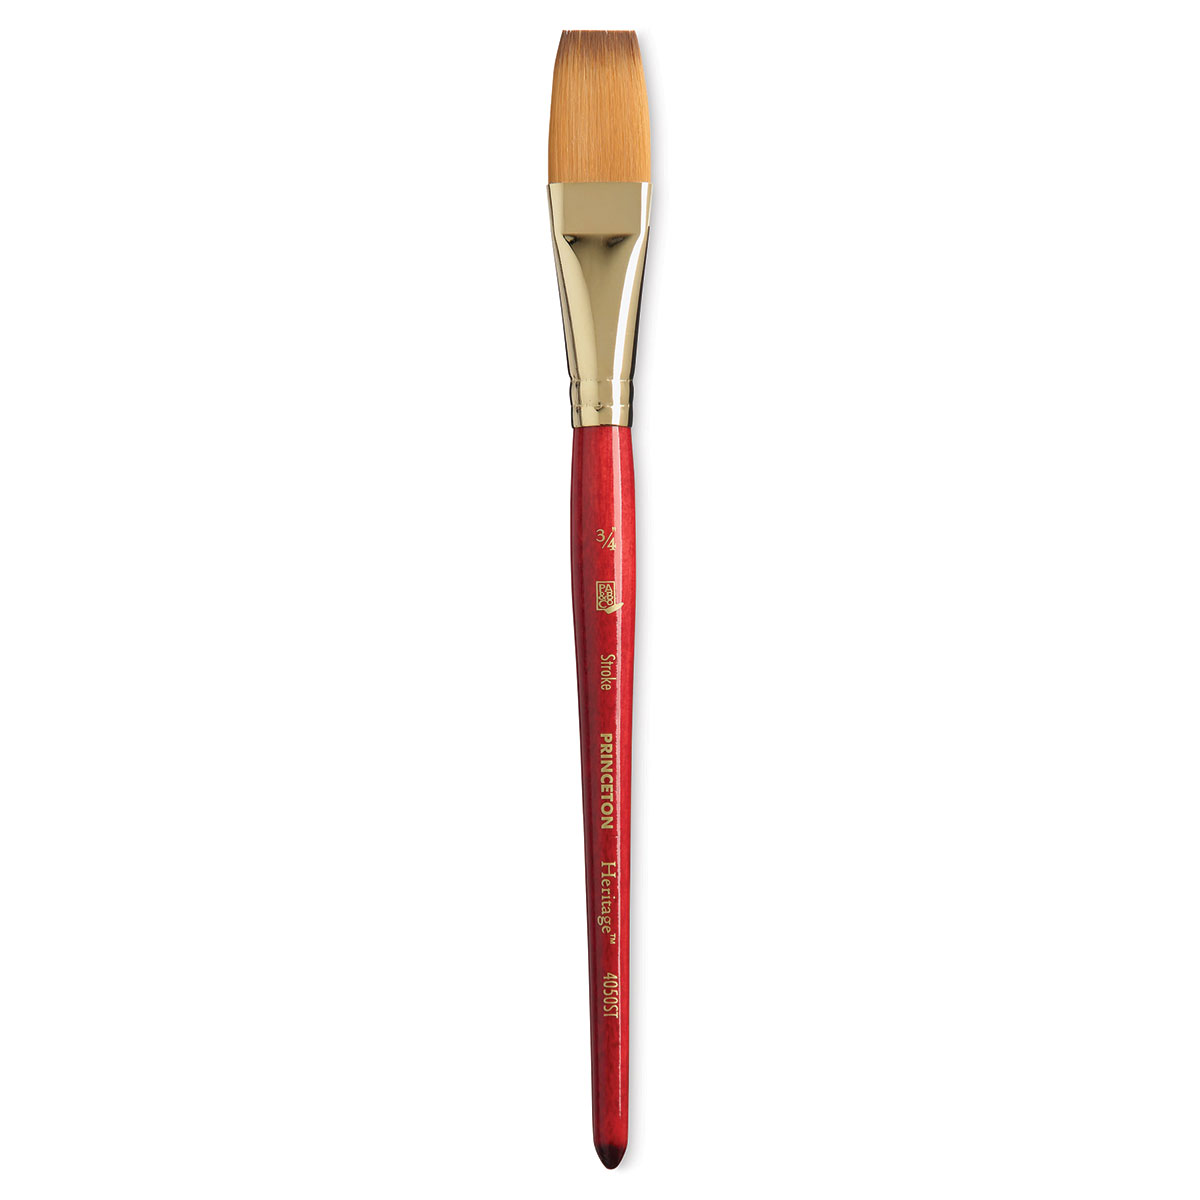 Princeton Pro Series 4000 Heritage Synthetic Sable Brushes - Set